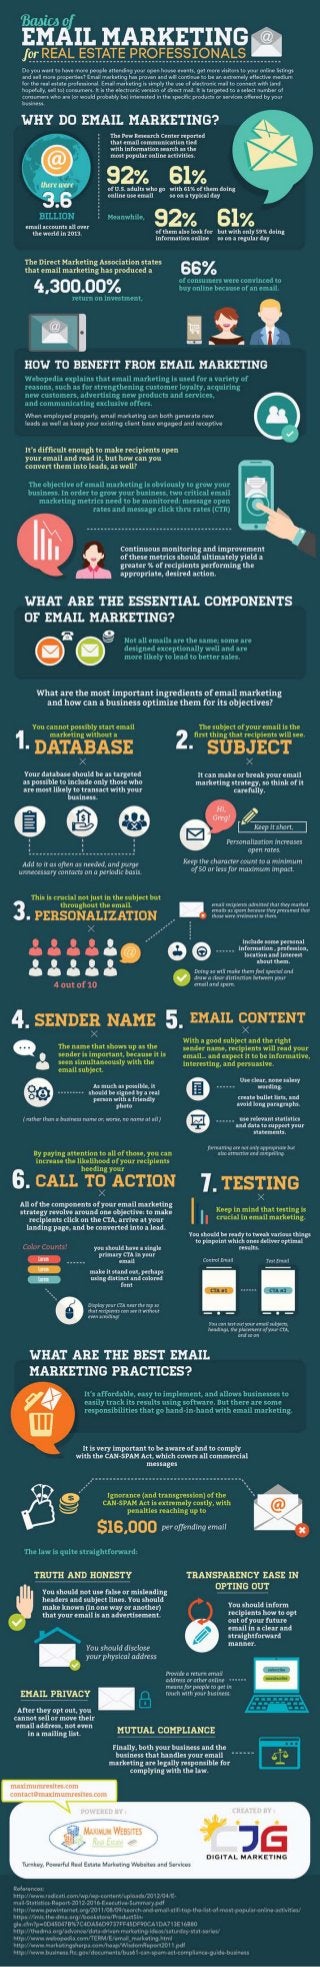 Basics of Email Marketing for Real Estate Professionals (Infographic)